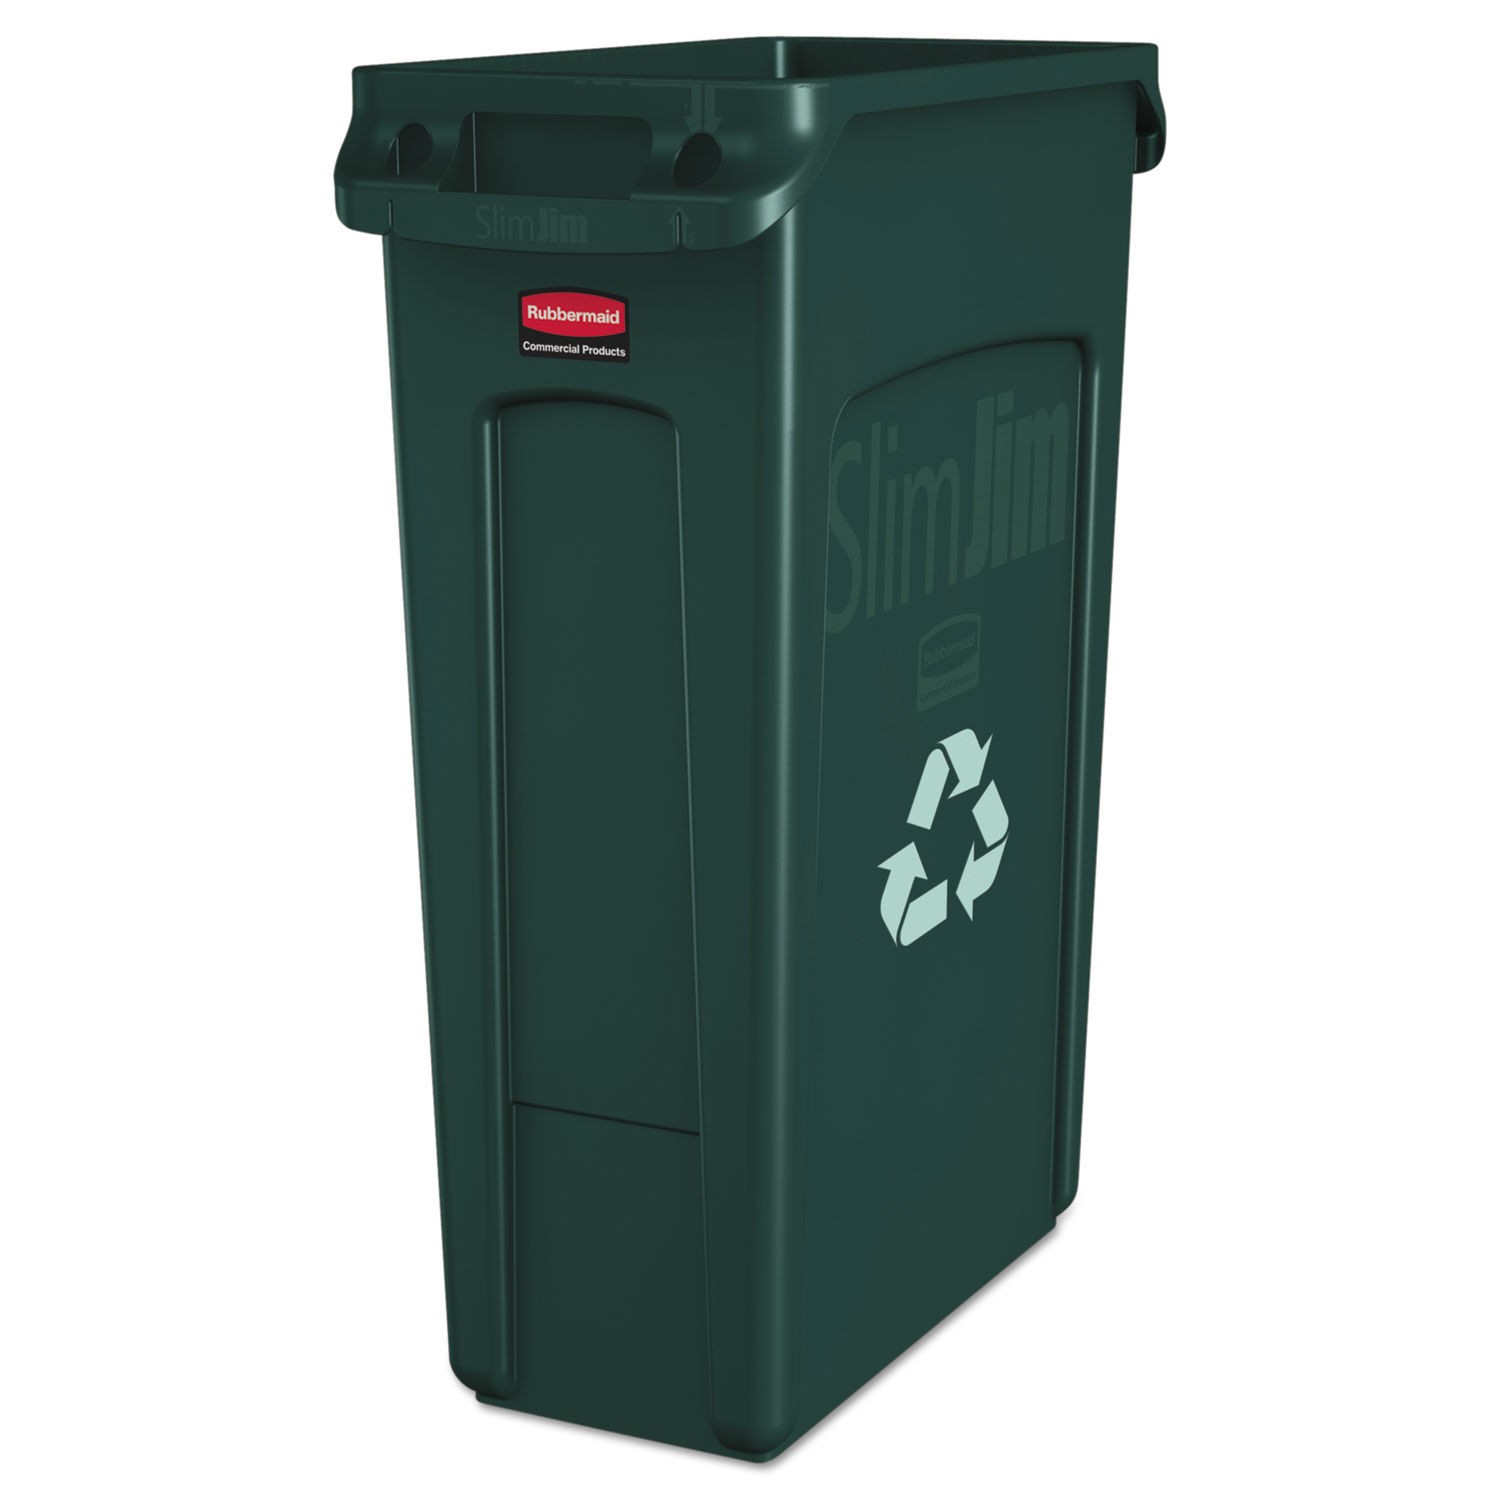 Slim Jim Recycling Container with Venting Channels, 23 Gallon, Green